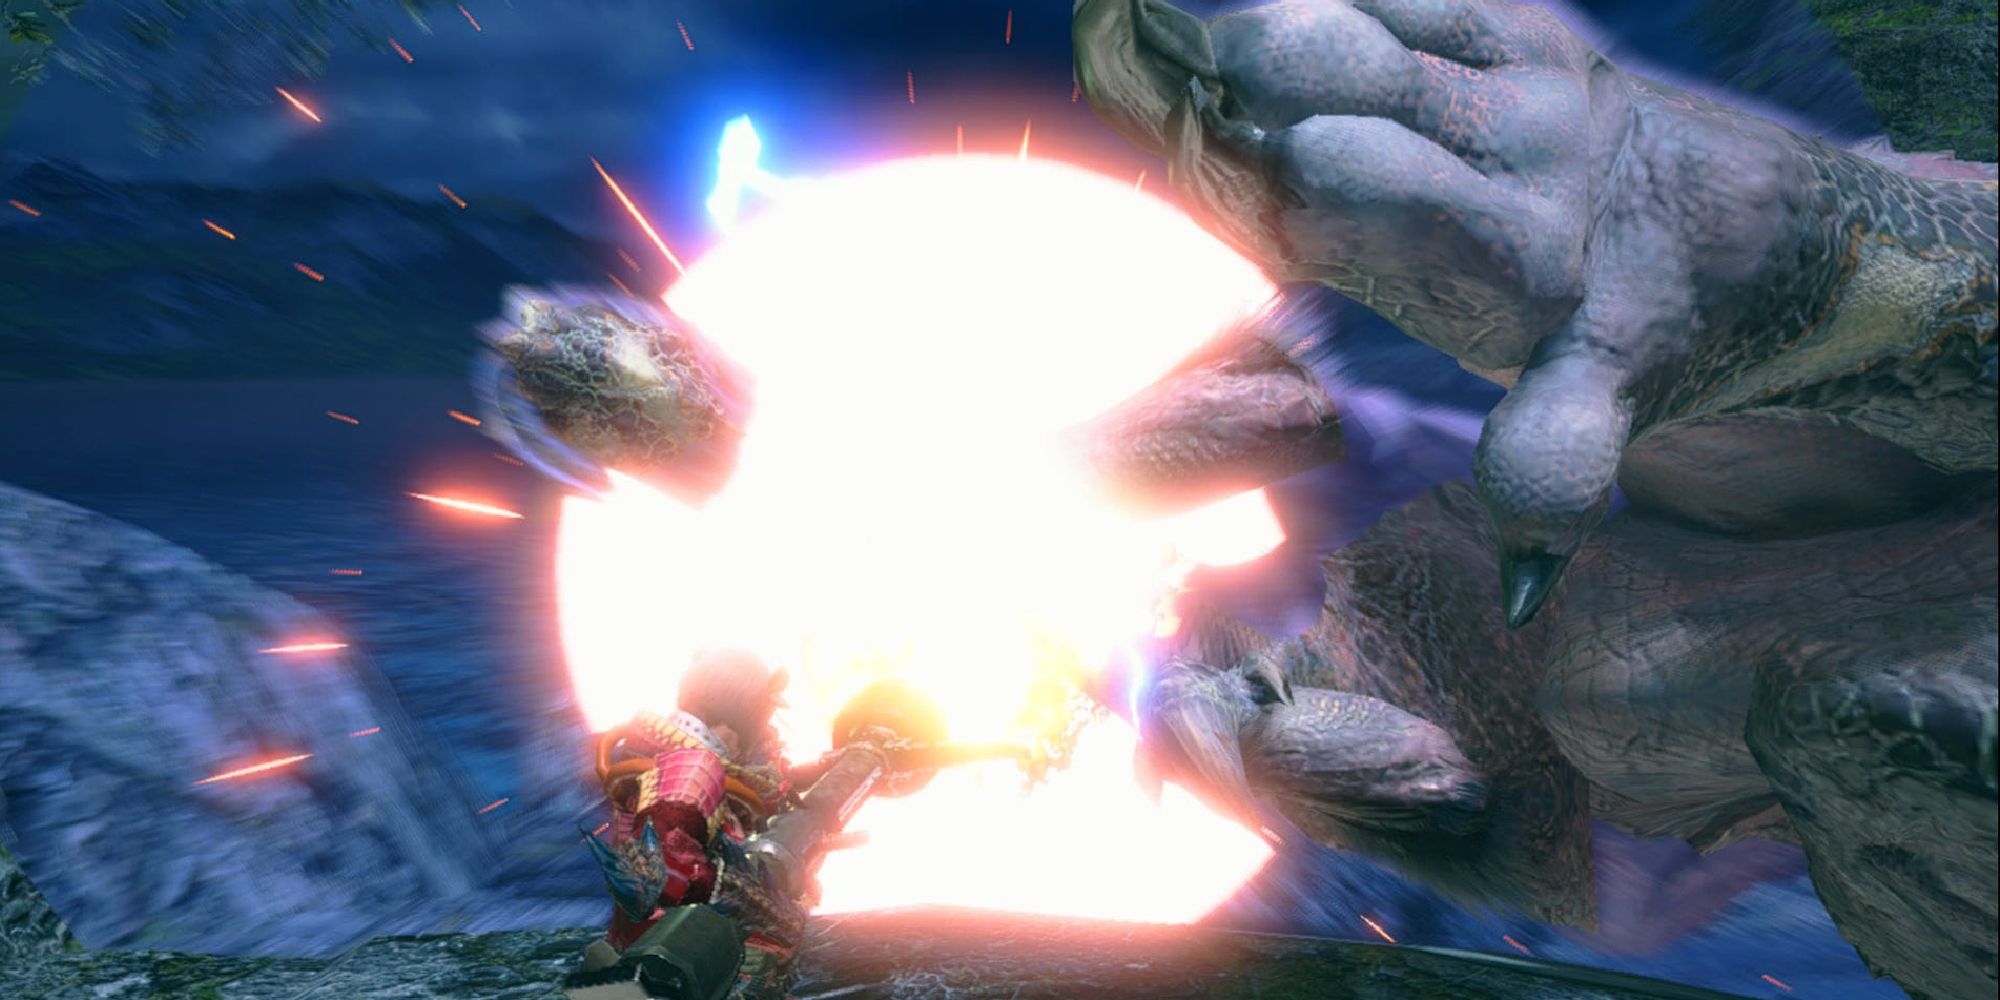 A Sticky Ammo shot exploding on a Rathalos mid-battle